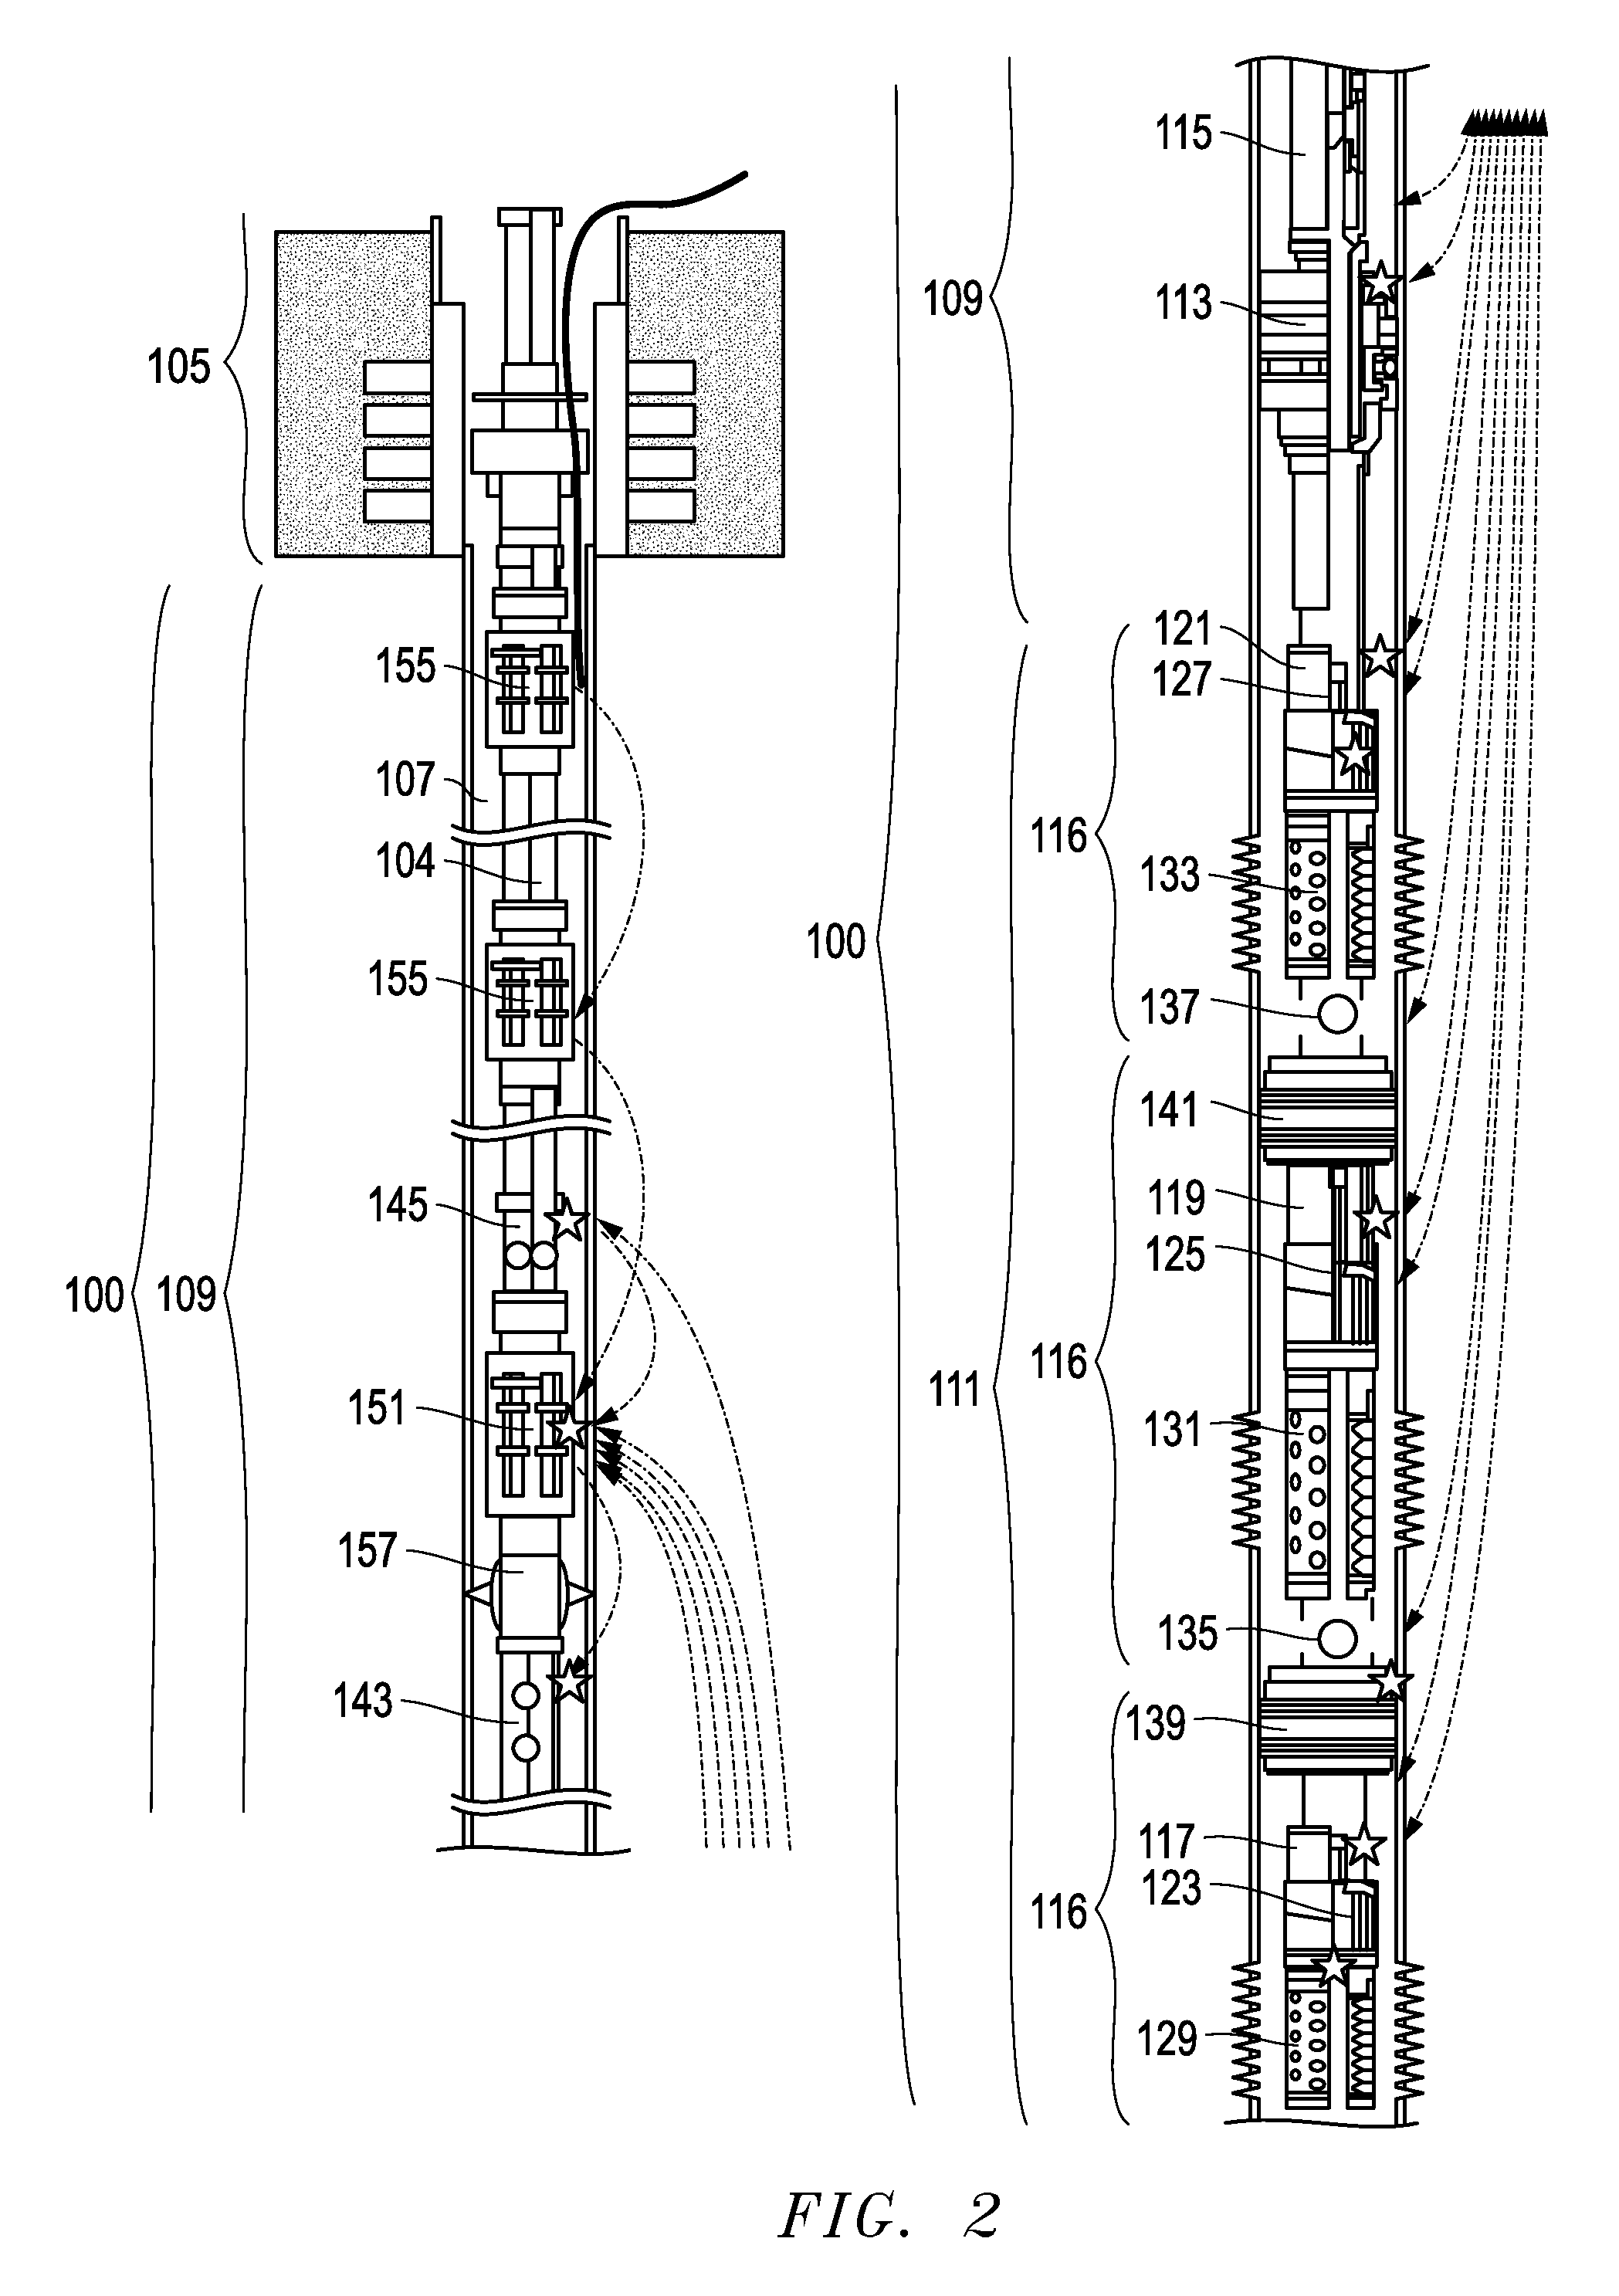 Downhole, single trip, multi-zone testing system and downhole testing method using such